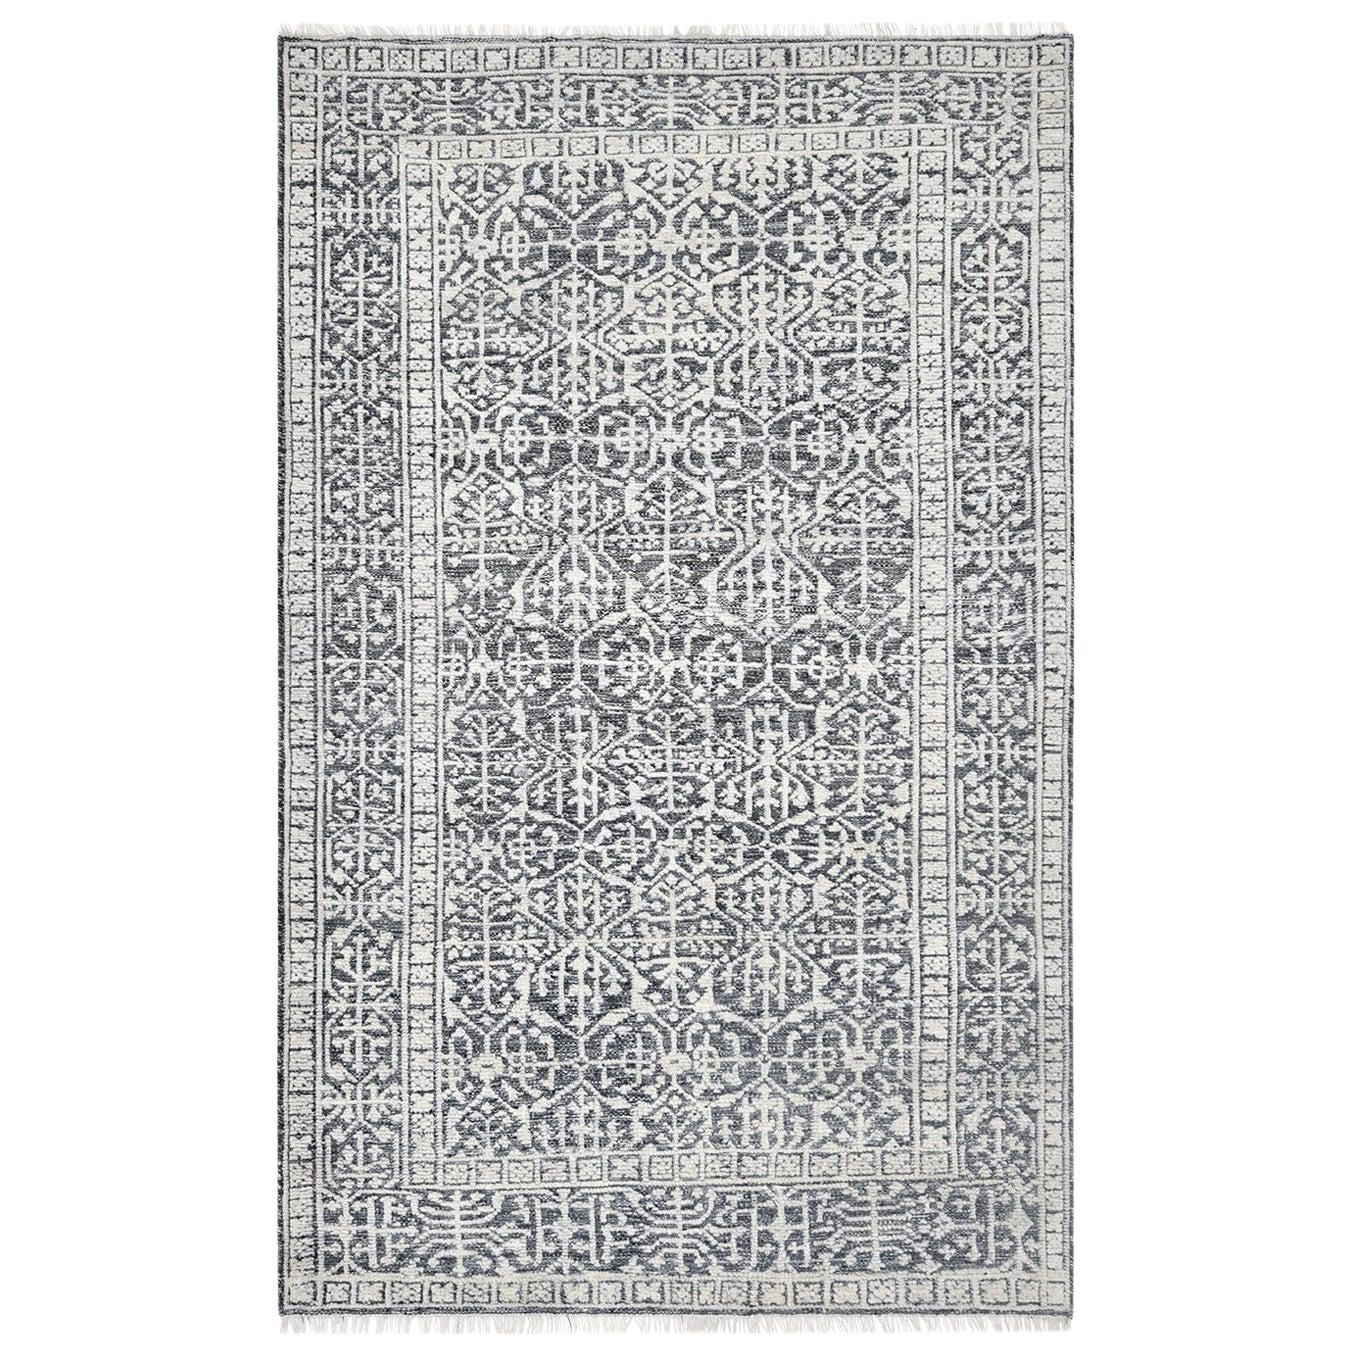 Indian Made Hand-Knotted Contemporary Transitional Area Rug